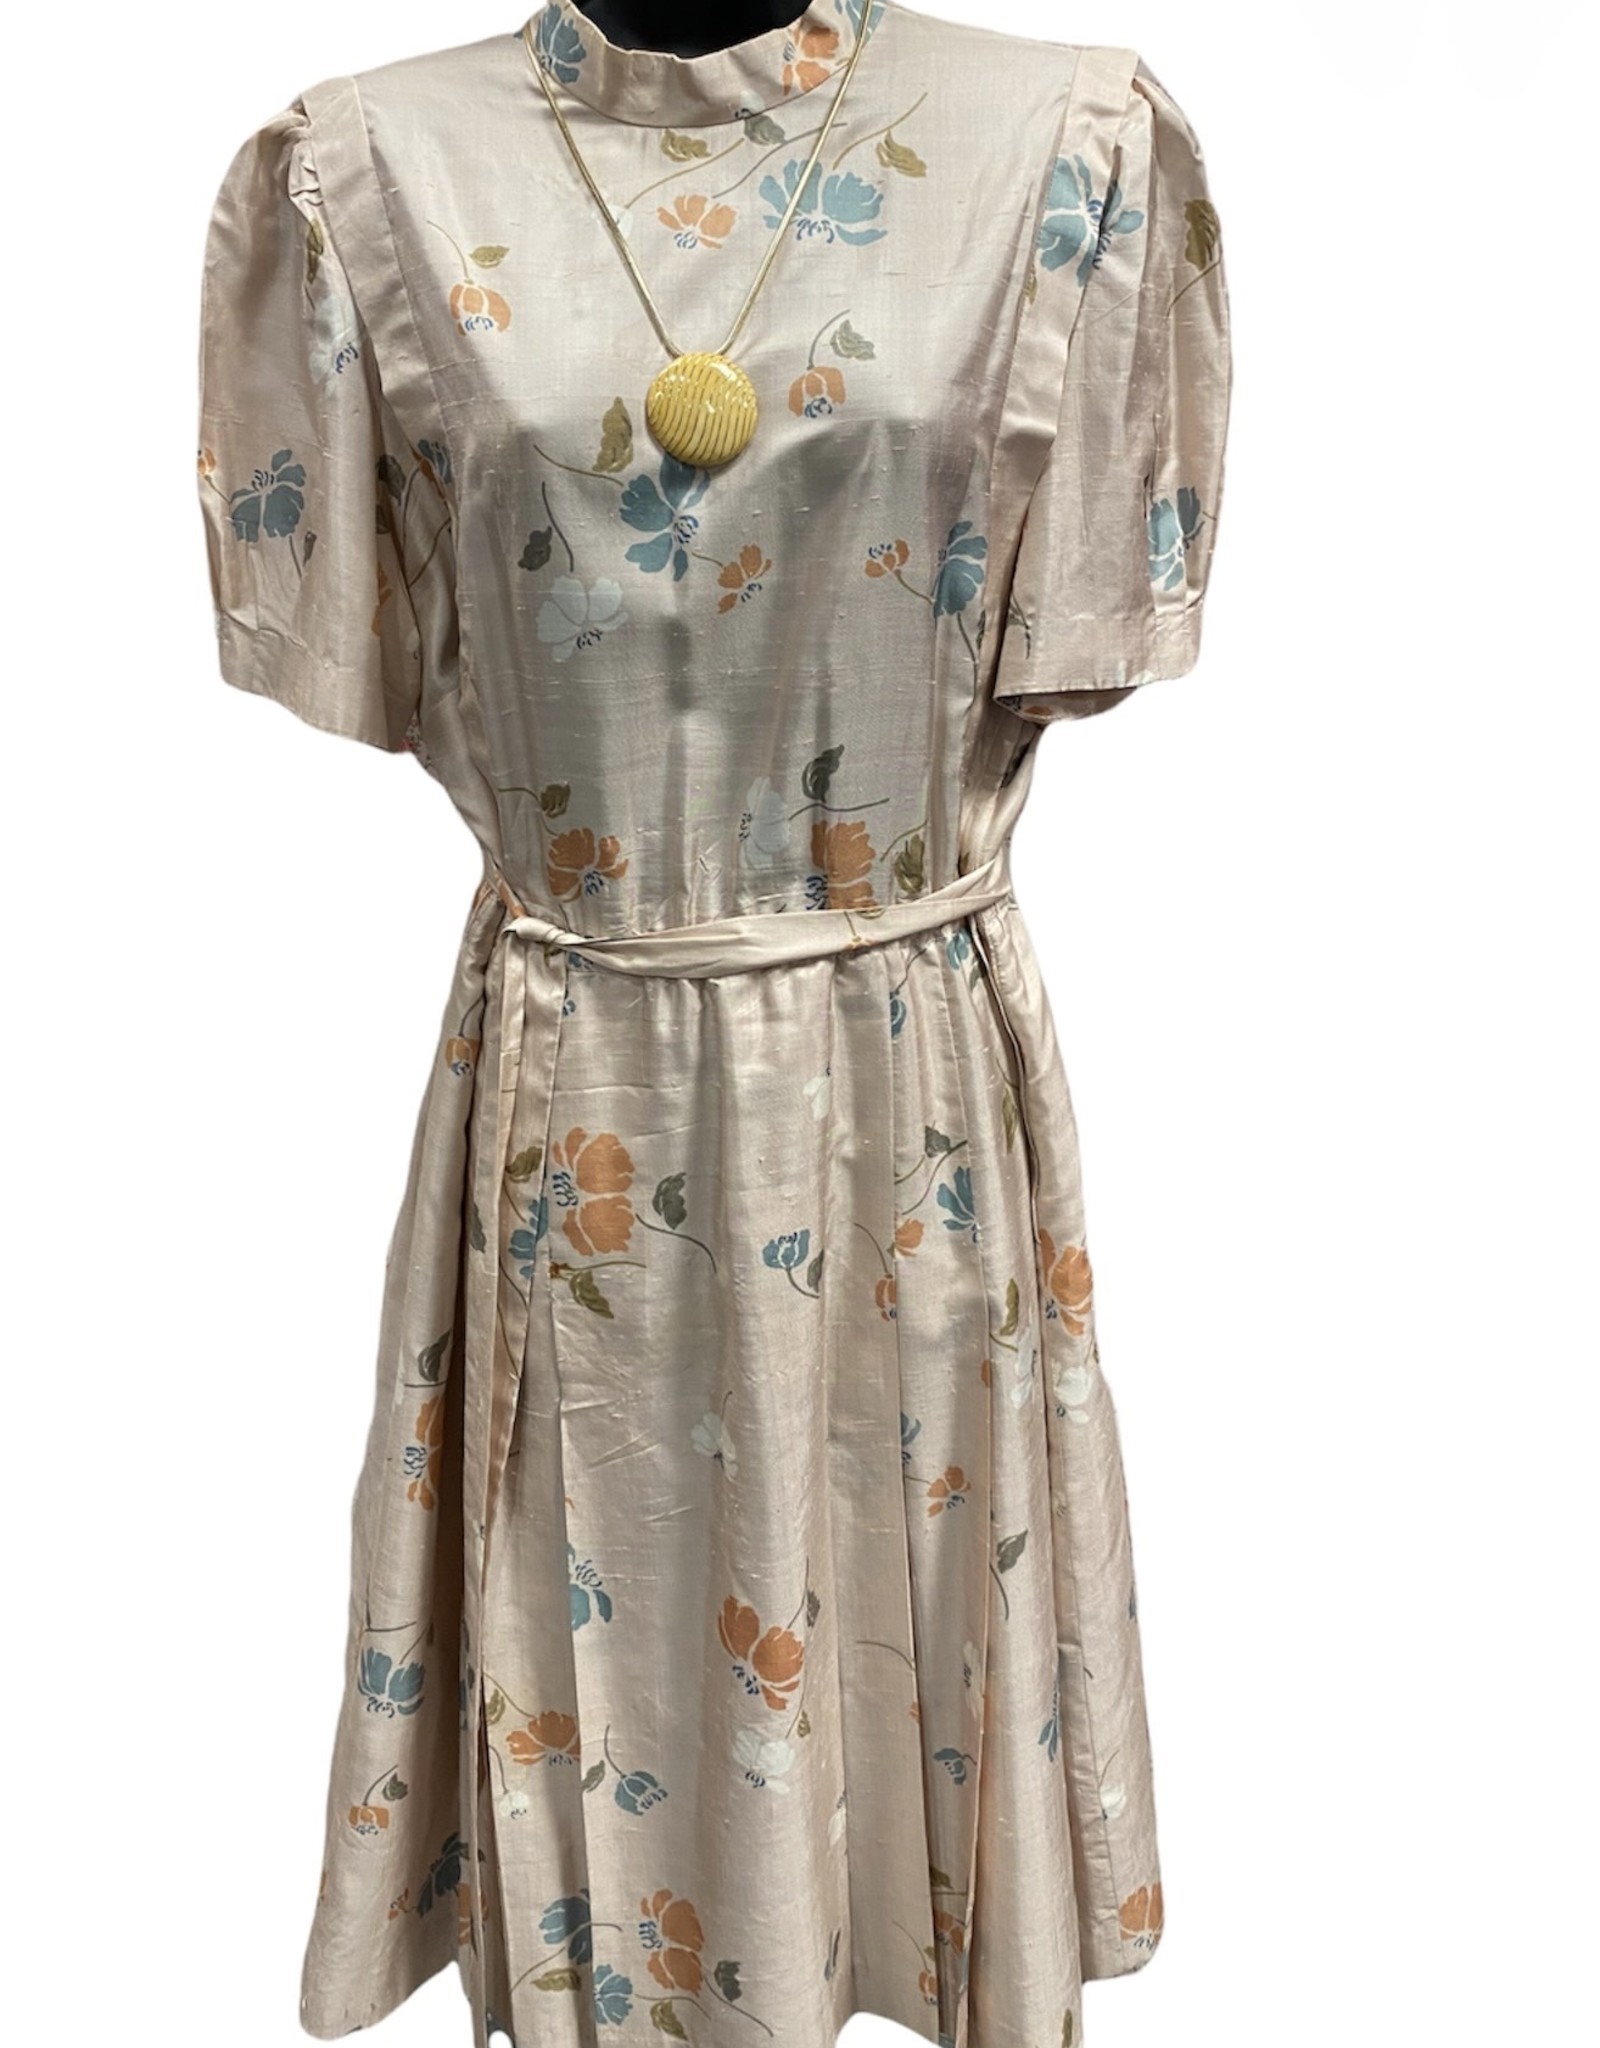 60s silk handmade dress with floral detail